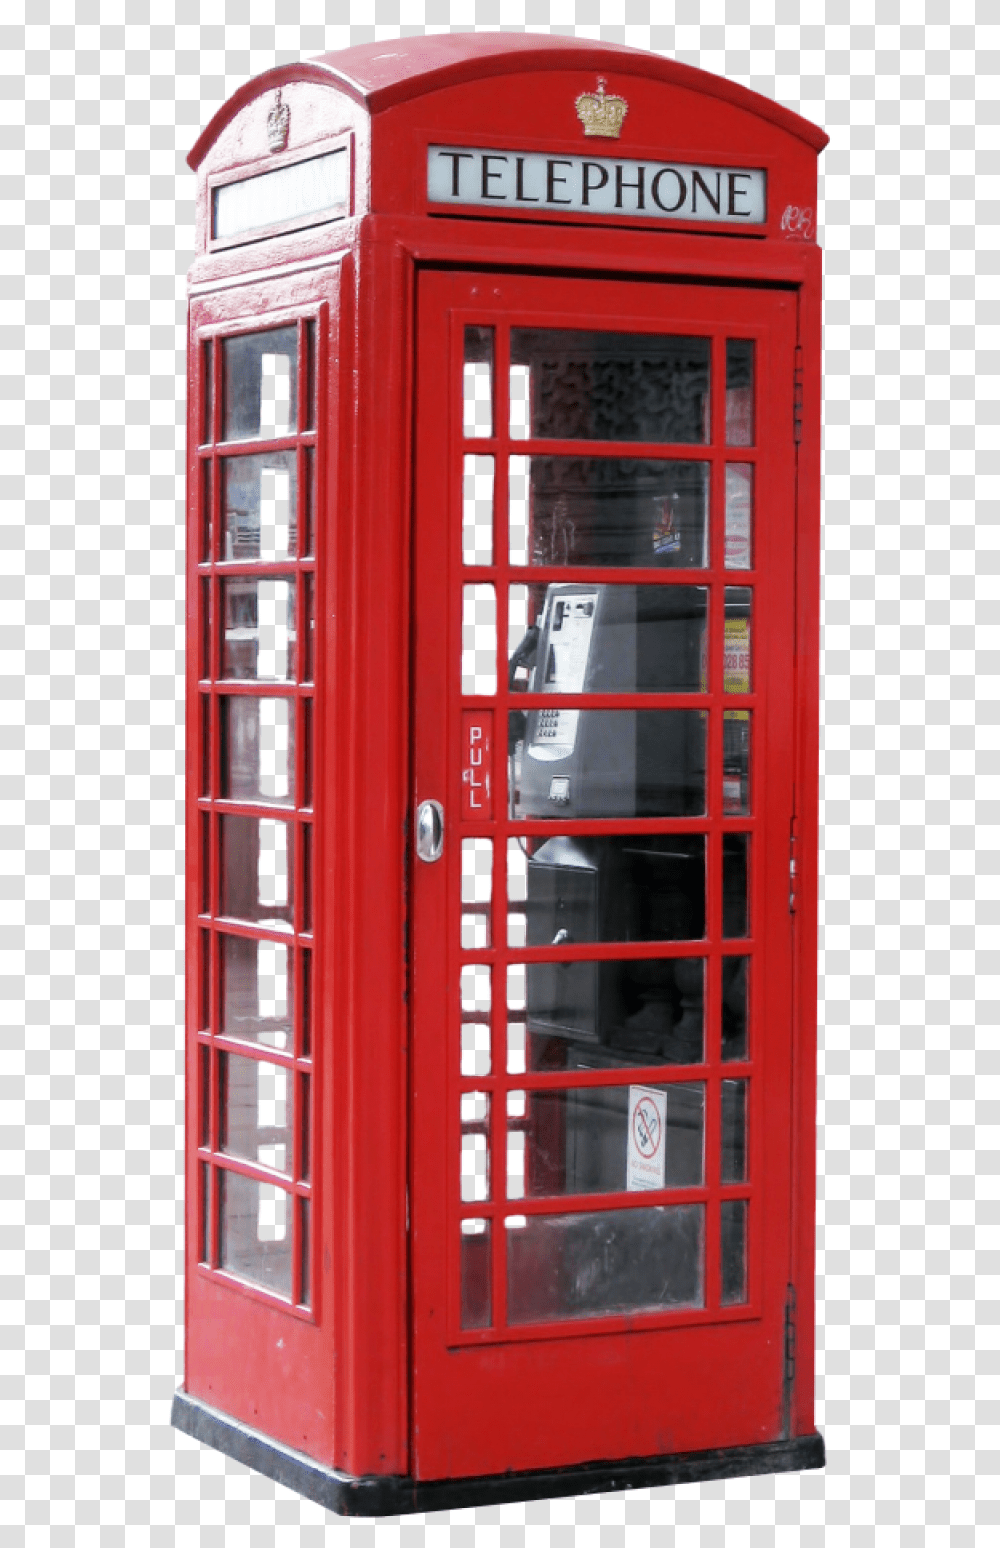 Phone Booth Image London Telephone Booth, Kiosk, Gas Pump, Machine Transparent Png